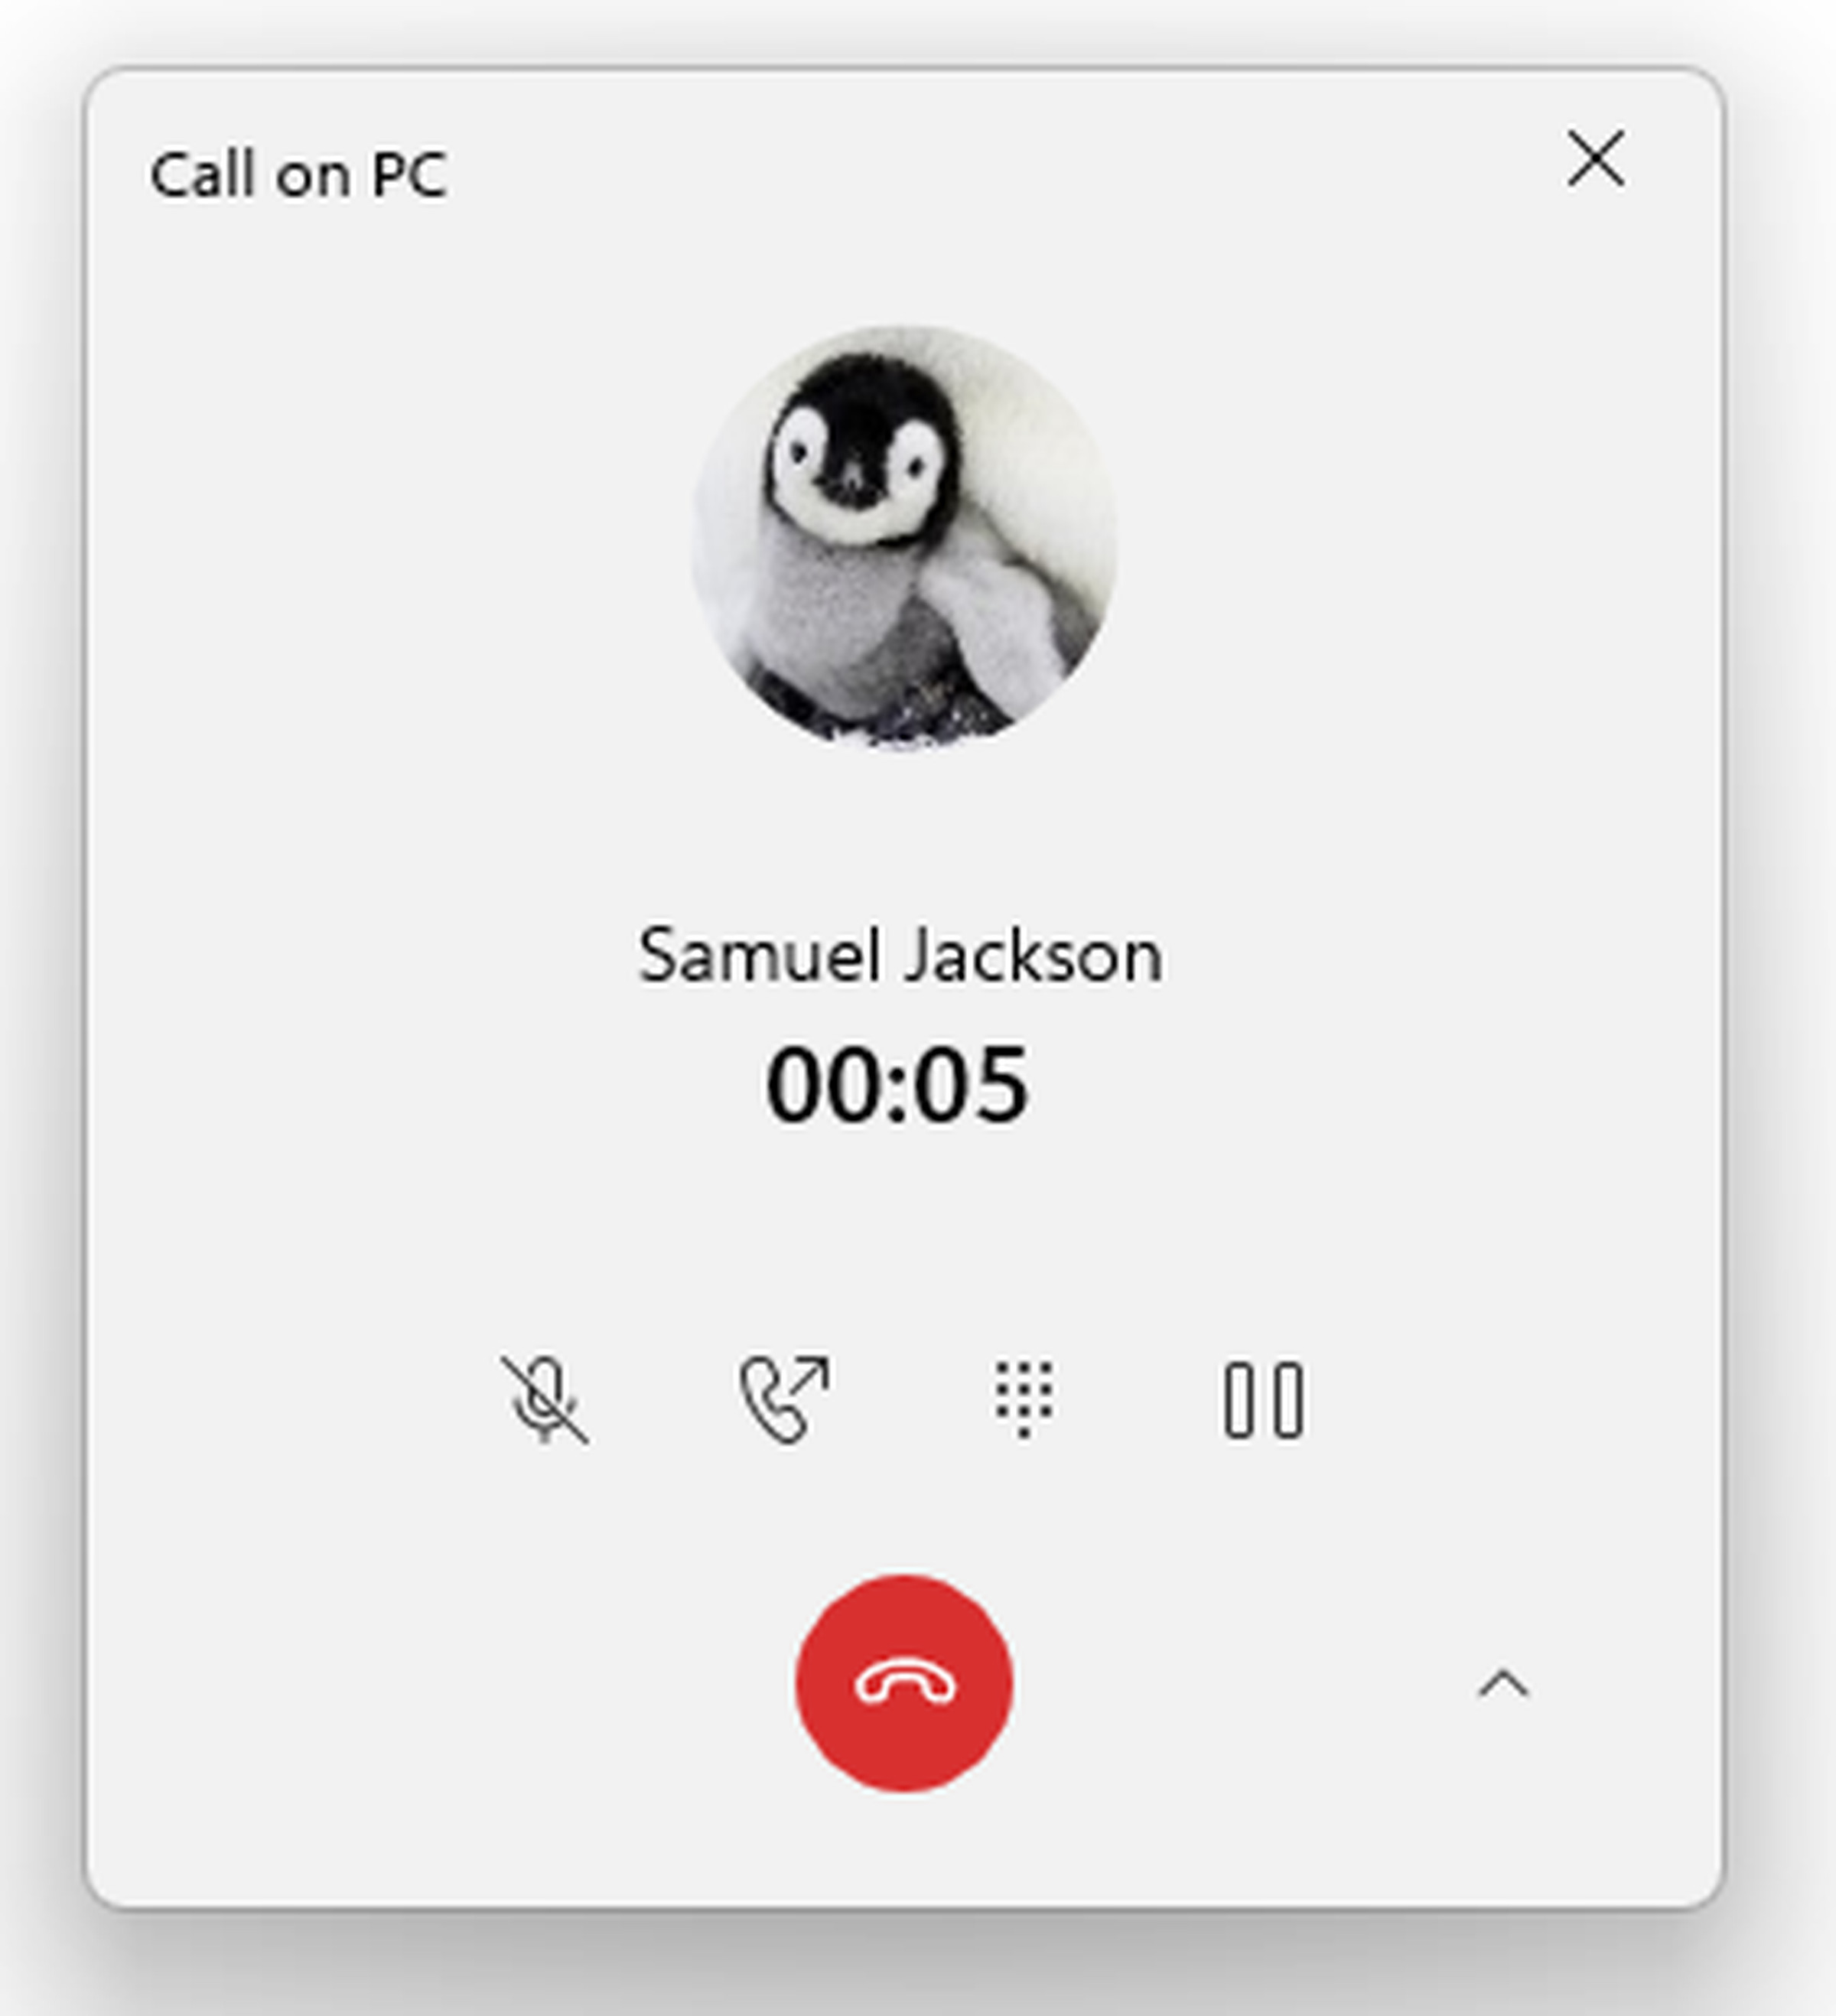 New calling interface for Your Phone on Windows 11.